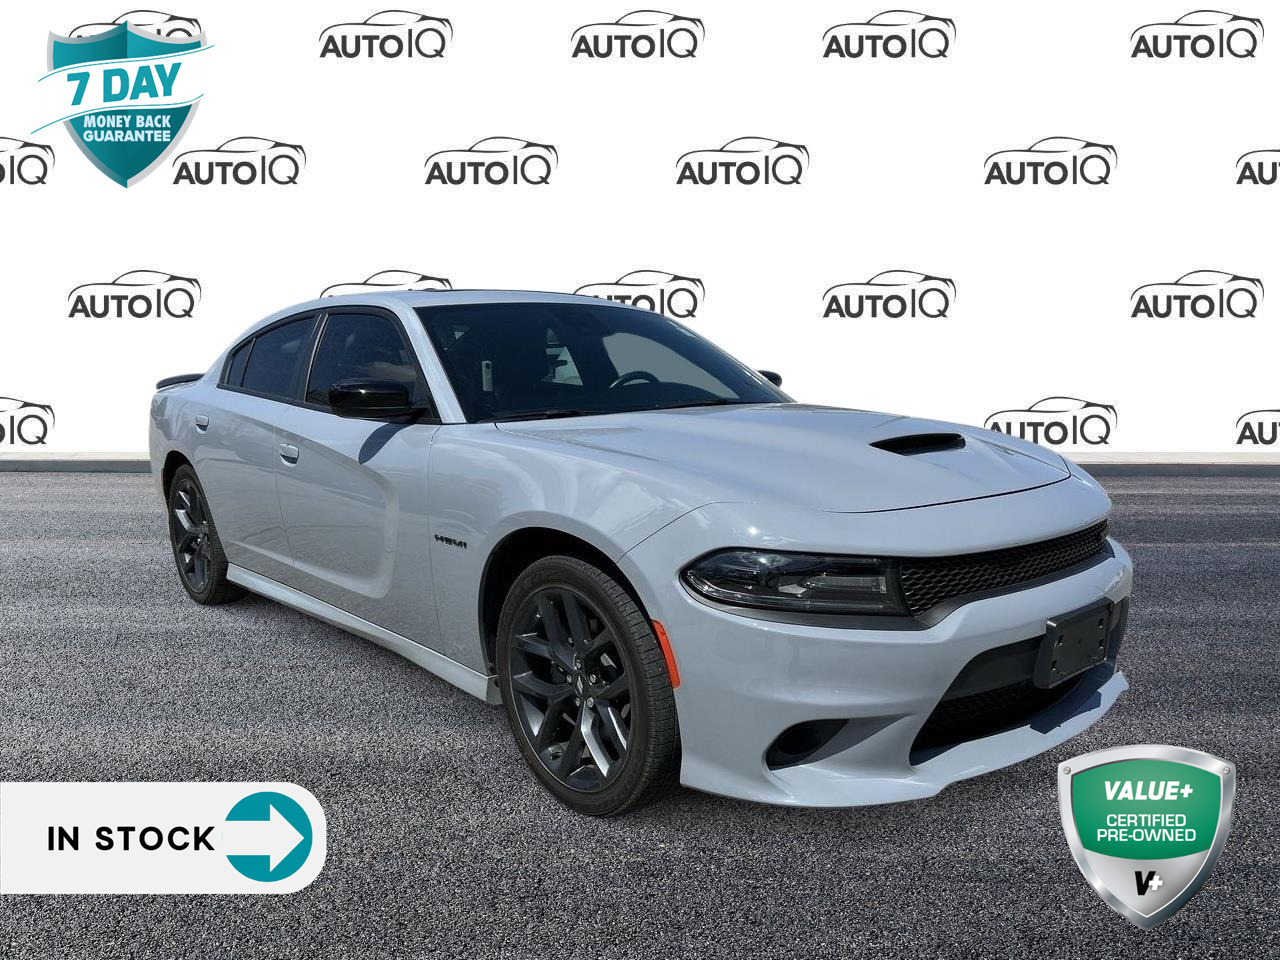 2021 Dodge Charger R/T Carbon & Suede Interior Package | Harmon/Kardo